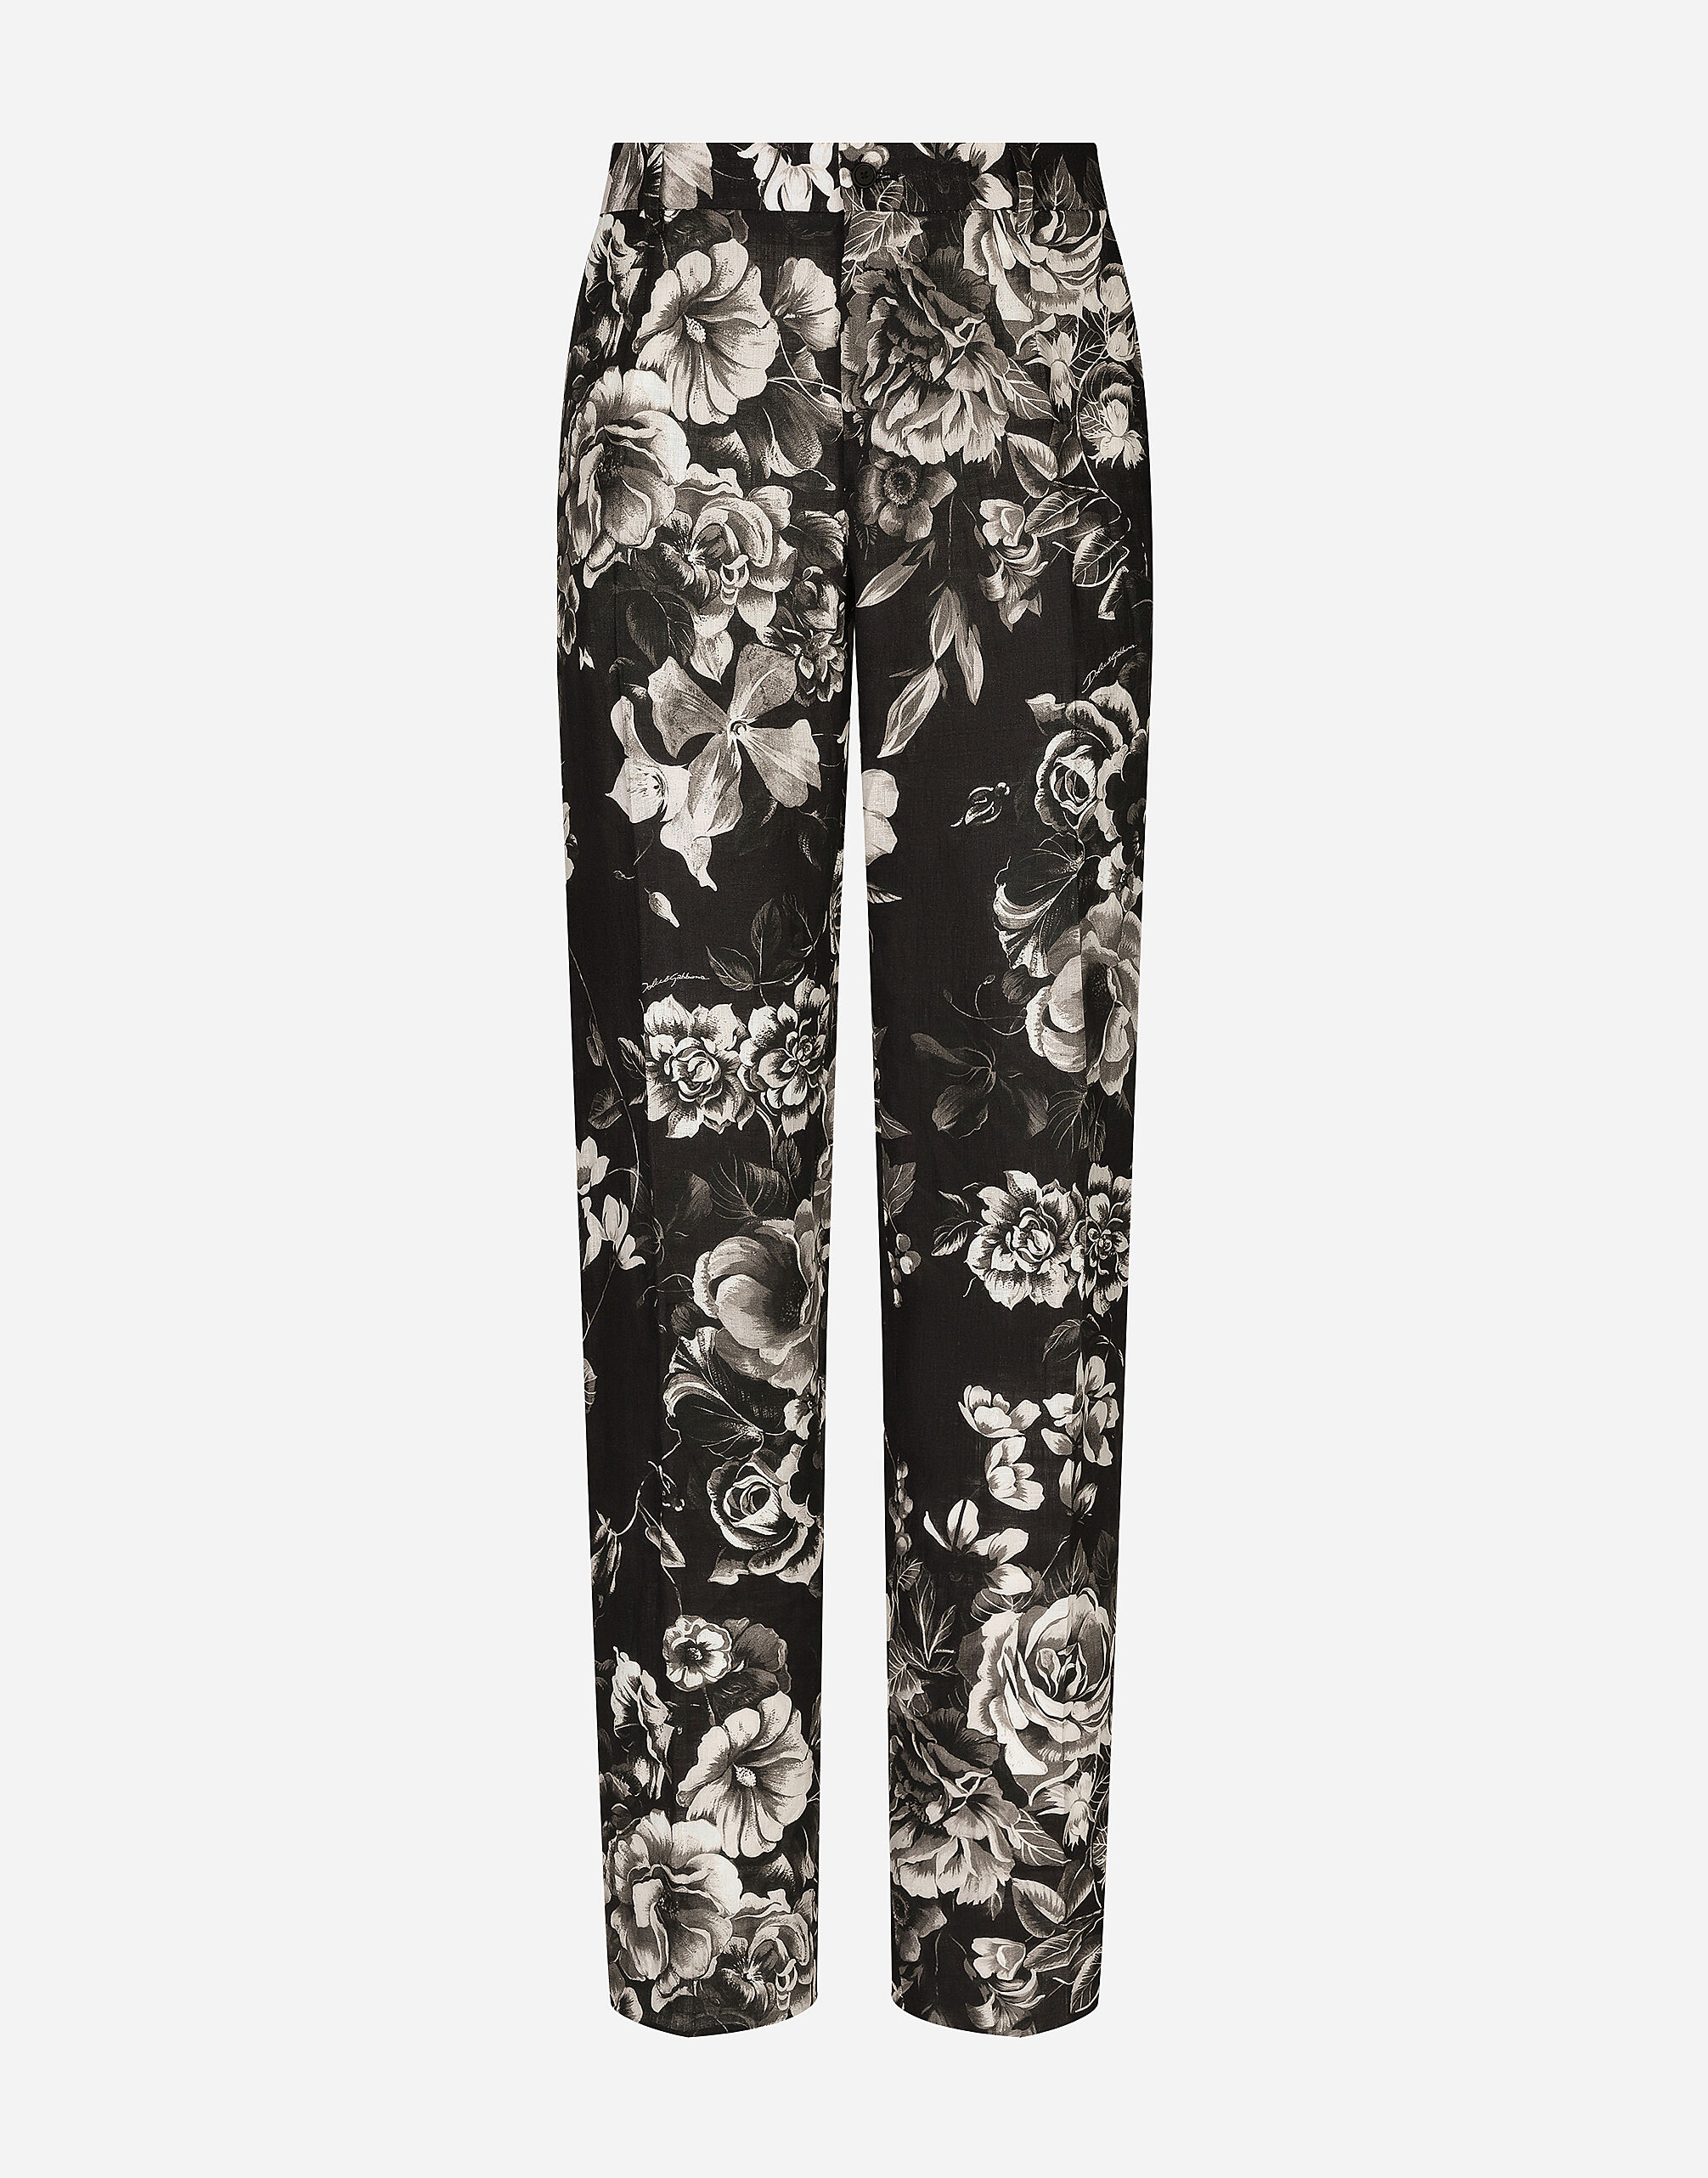 Dolce & Gabbana Classic linen pants with floral print Multicolor GY6UETFR4BP